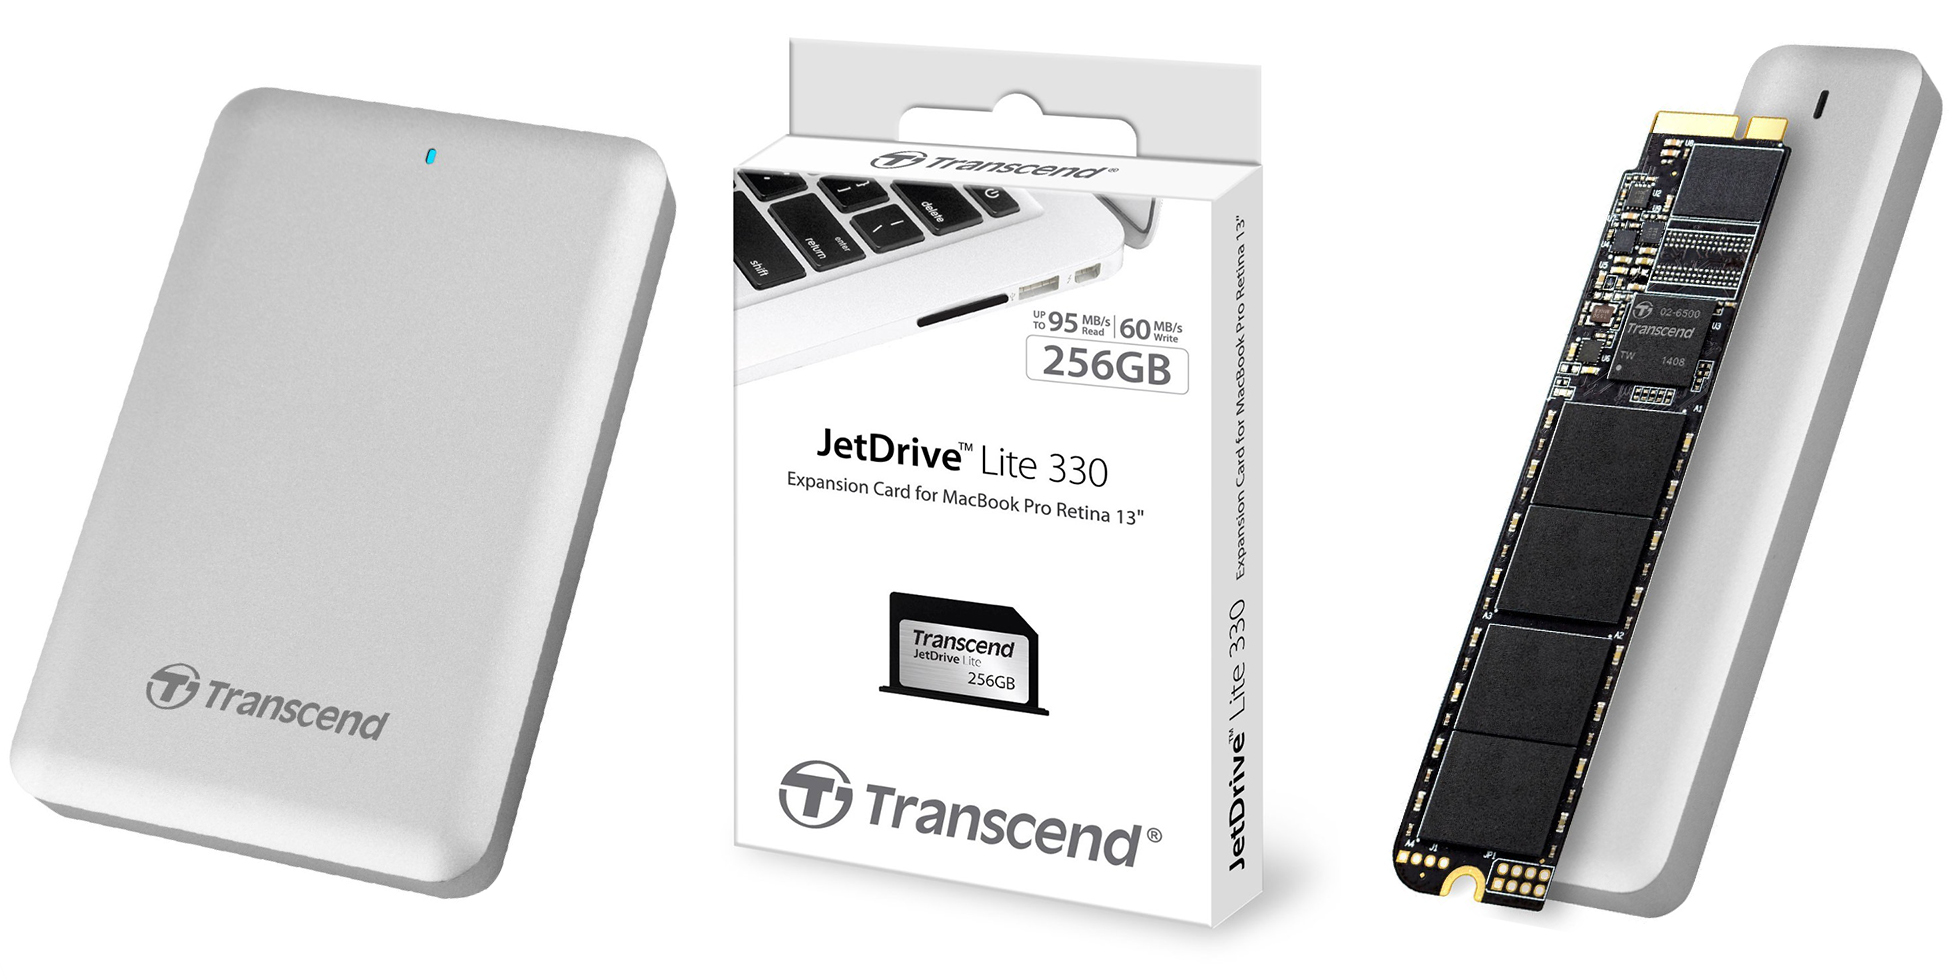 Outside Are depressed con man Transcend storage upgrades for your Mac: 512GB Portable Thunderbolt SSD  $284, 256GB Expansion Card $170, more